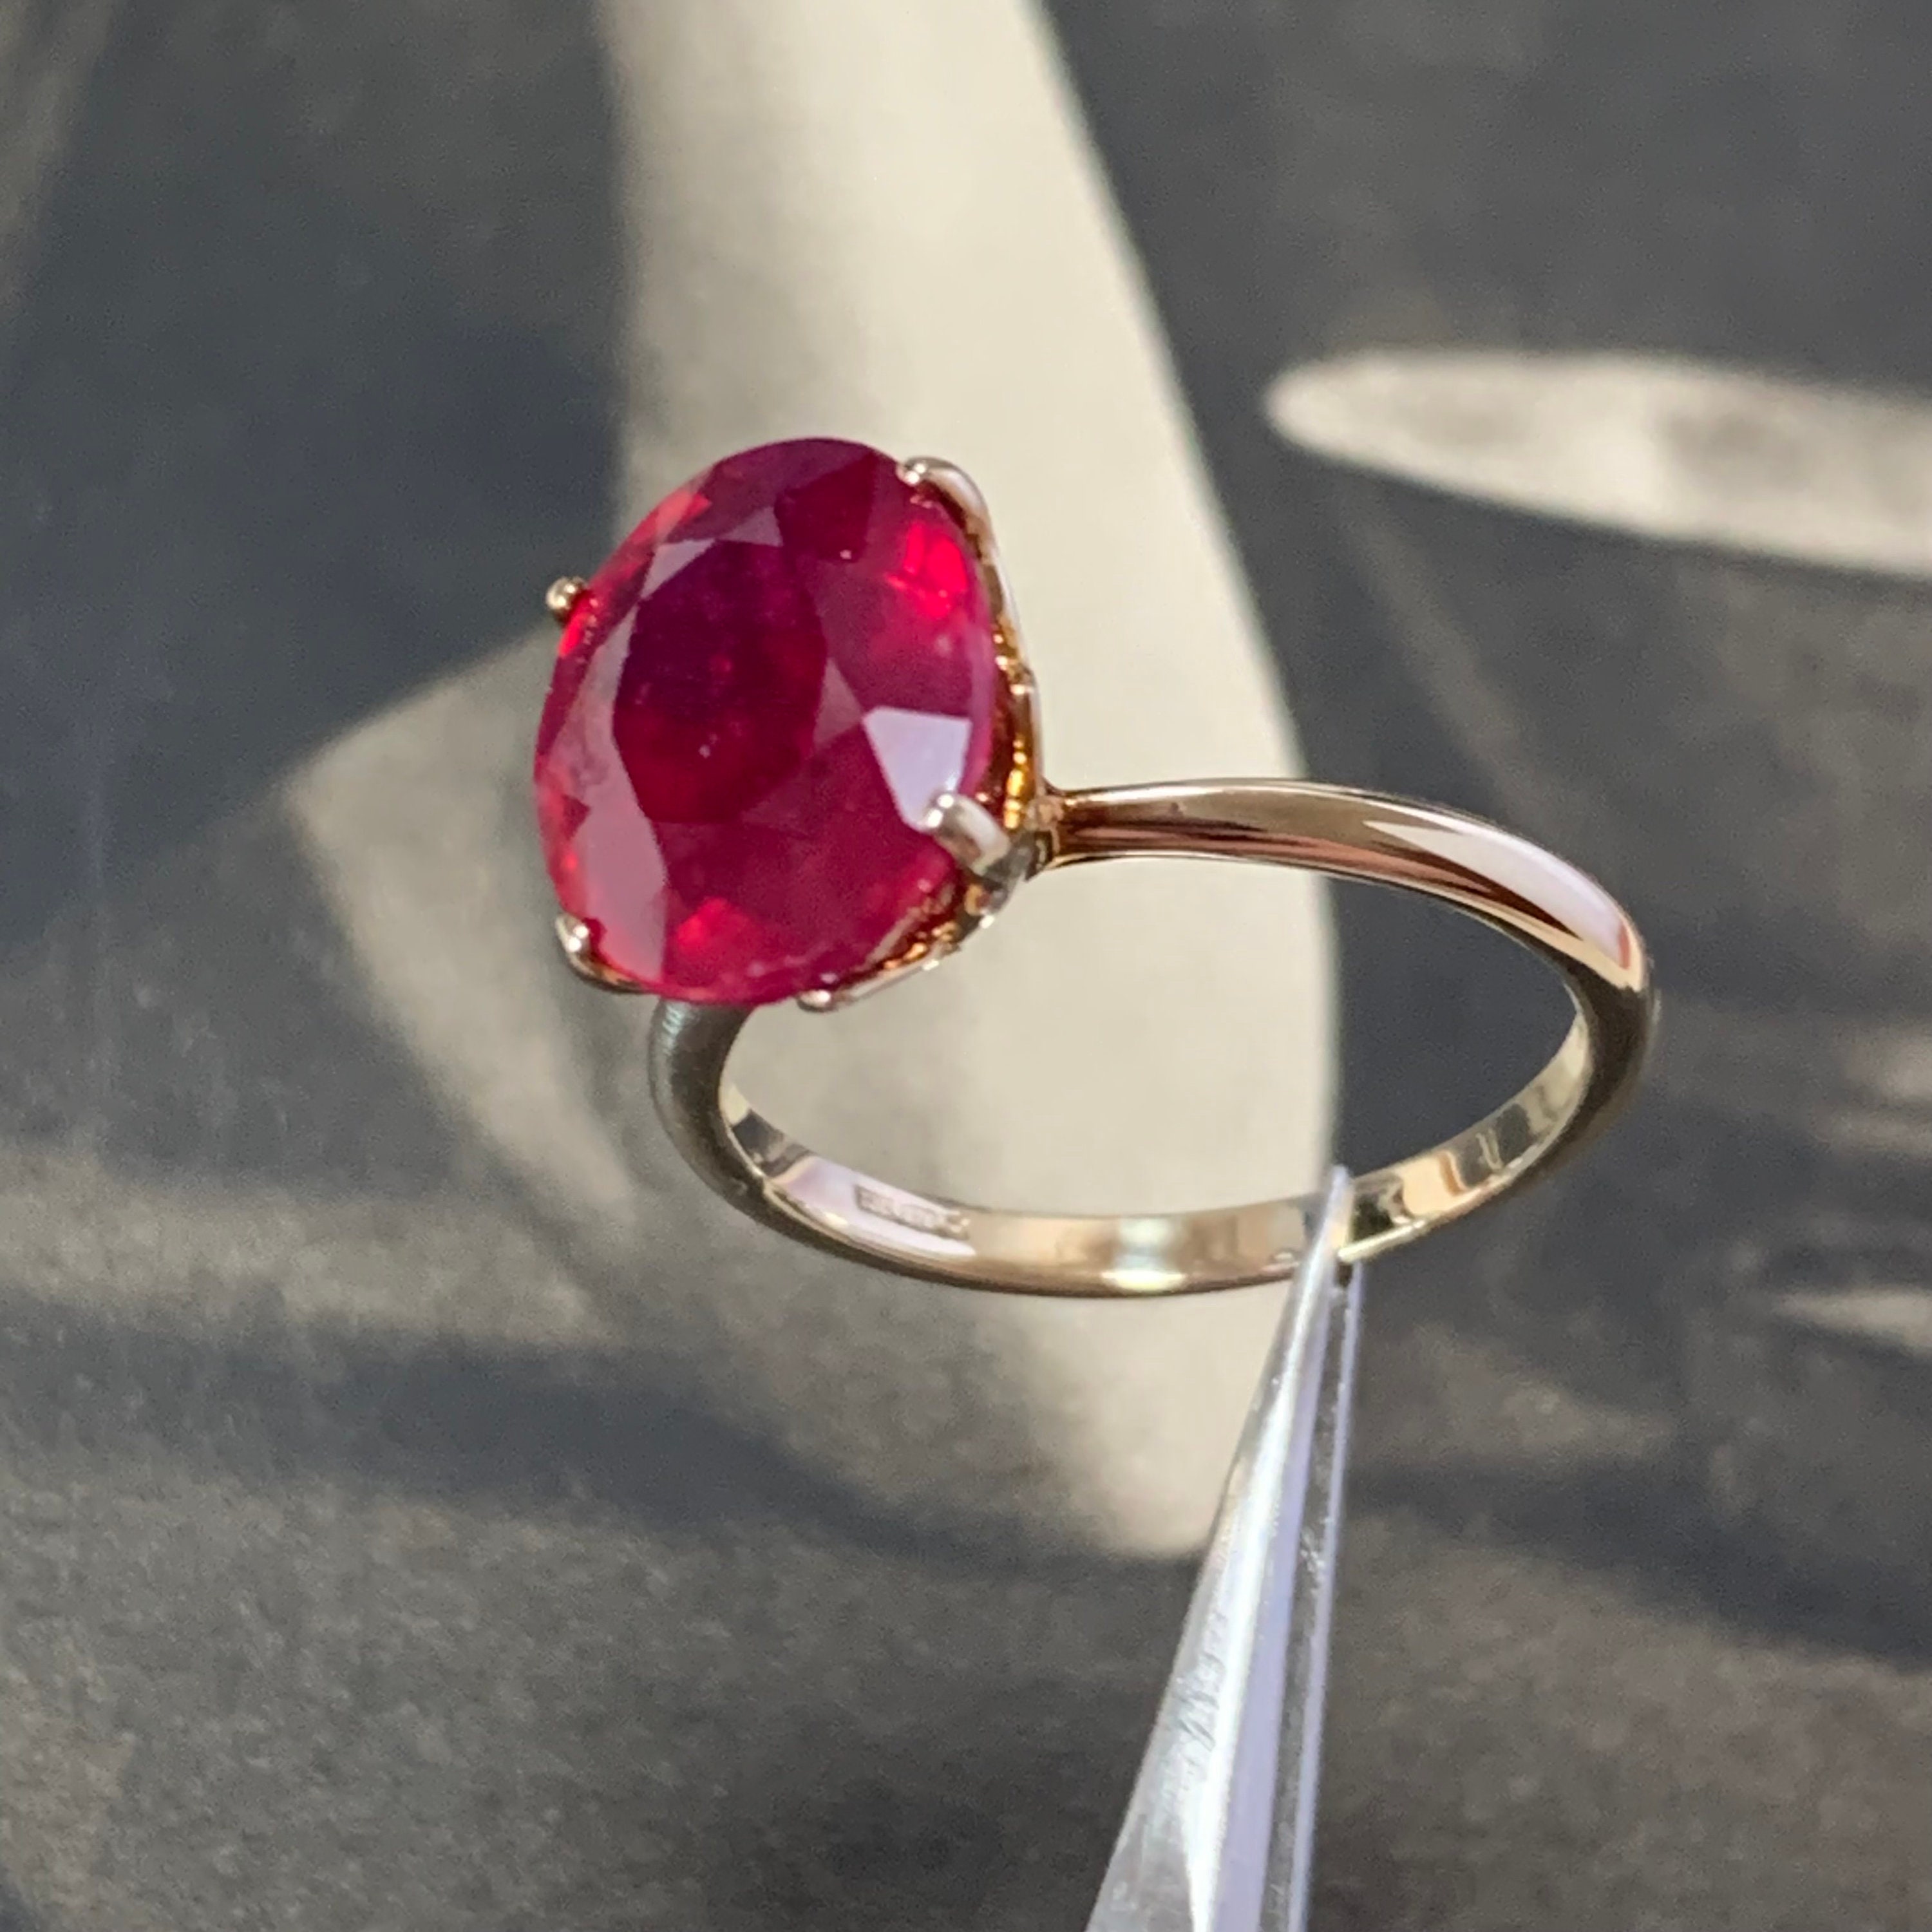 Vintage 9Ct Gold Ruby Solitaire Ring That Embodies Both The Romantic Symbolism Of An Engagement & Quality Fine Craftsmanship